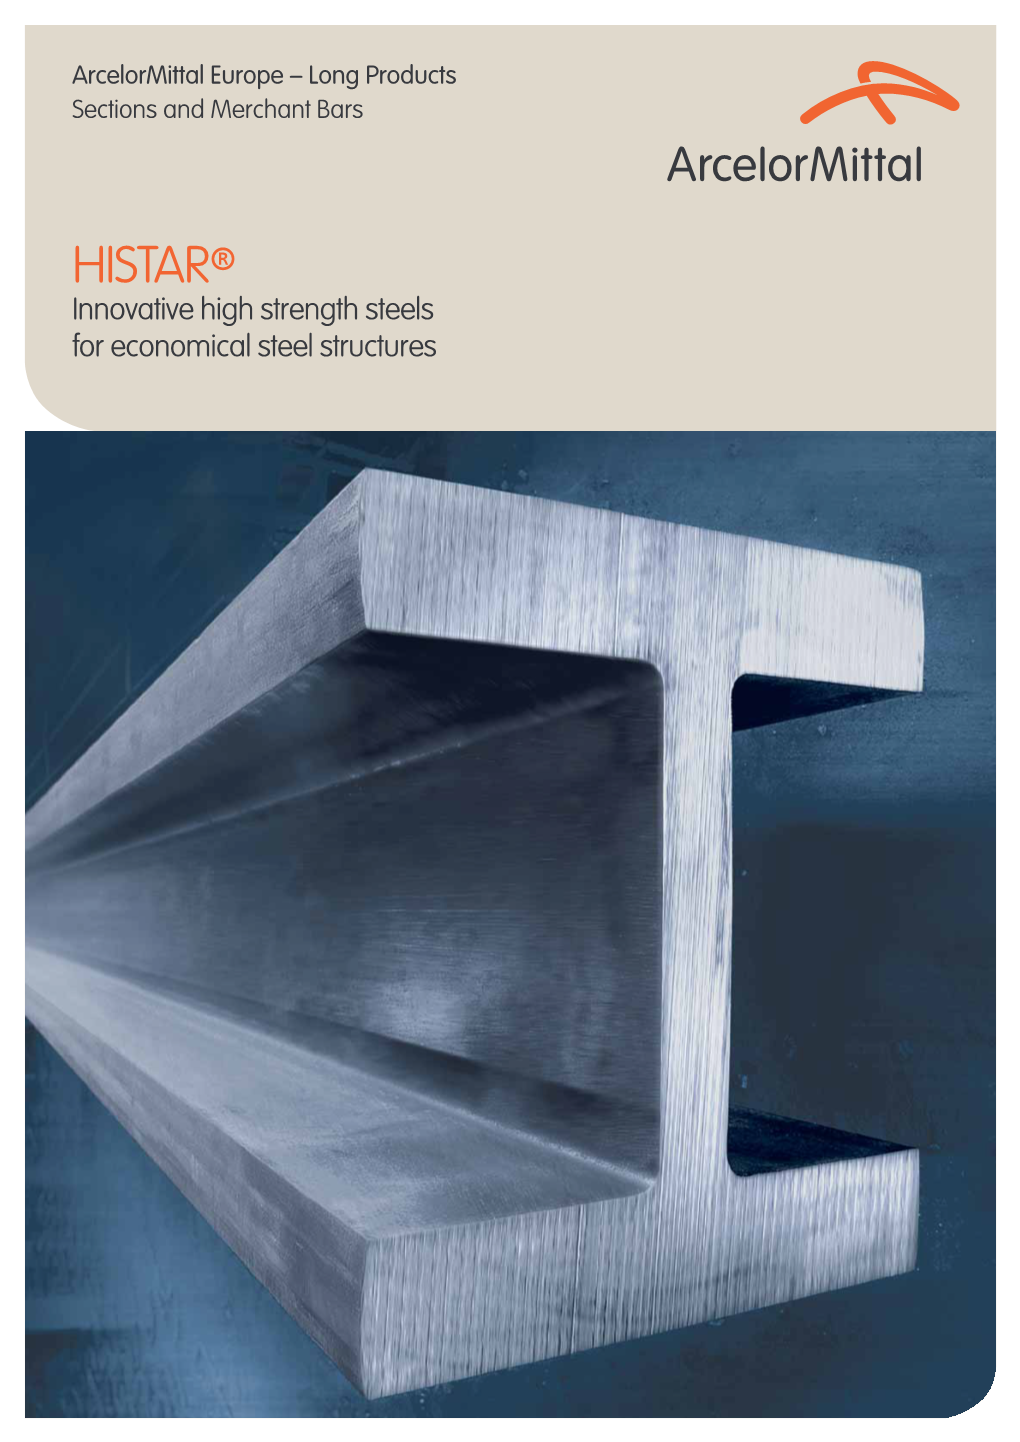 HISTAR® Innovative High Strength Steels for Economical Steel Structures